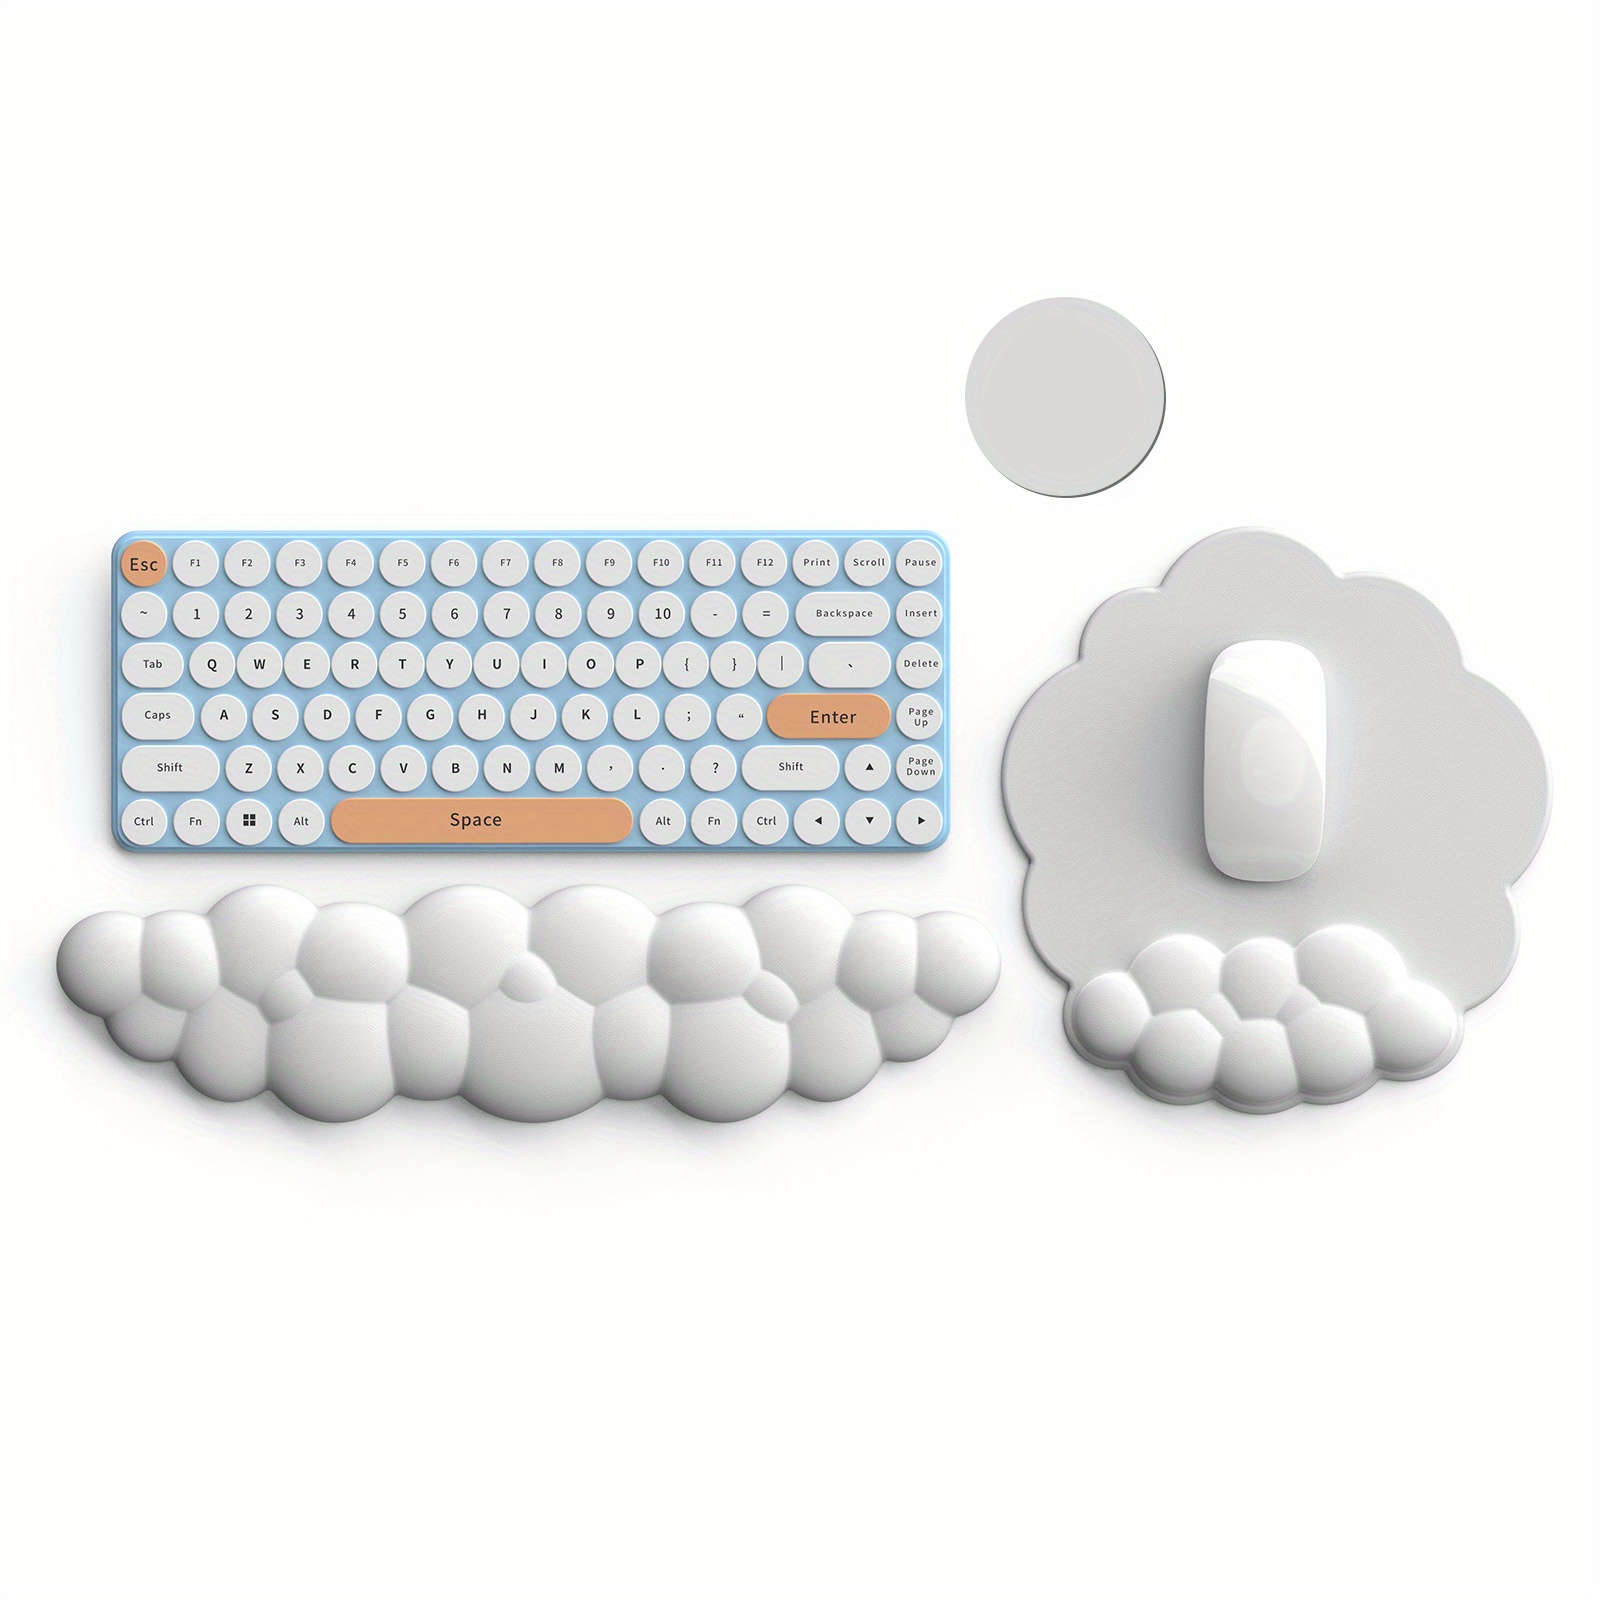 Juome Mouse Cloud Wrist Rest Pad, Ergonomic Mouse Pad with Memory Foam, Cute  Mouse Pad Wrist Support for Computer, Laptop, Mac, Gaming, Home Office  (White) 